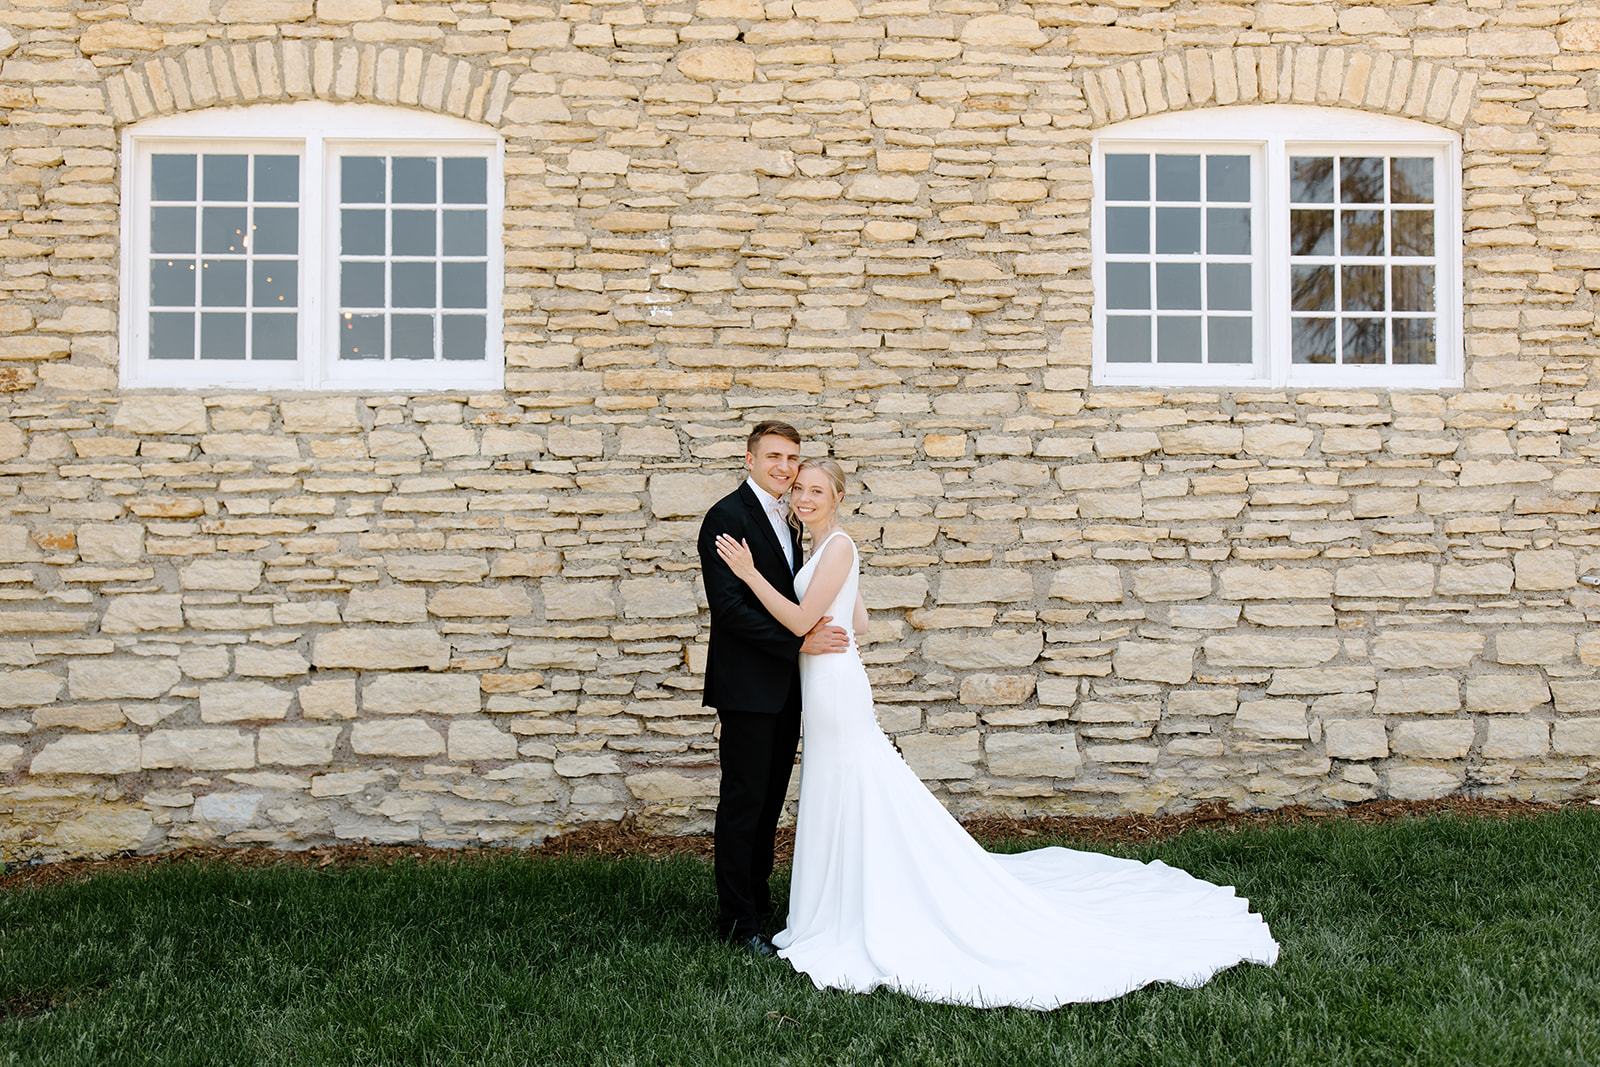 Bride and groom in front of a brick wall